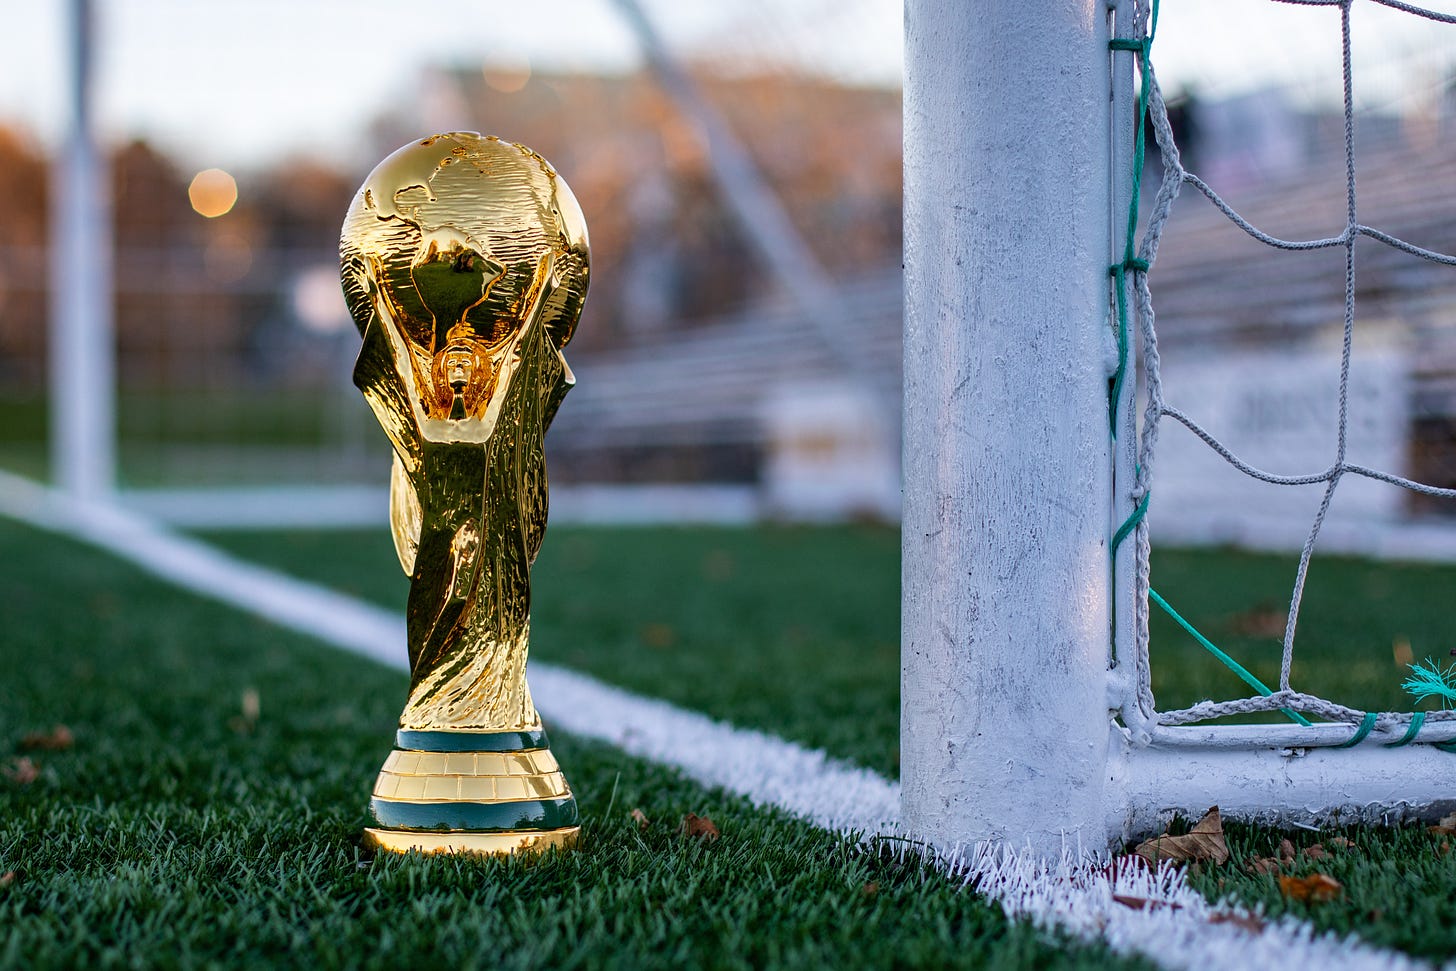 A World Cup trophy sits on a soccer pitch in front of the goal line.